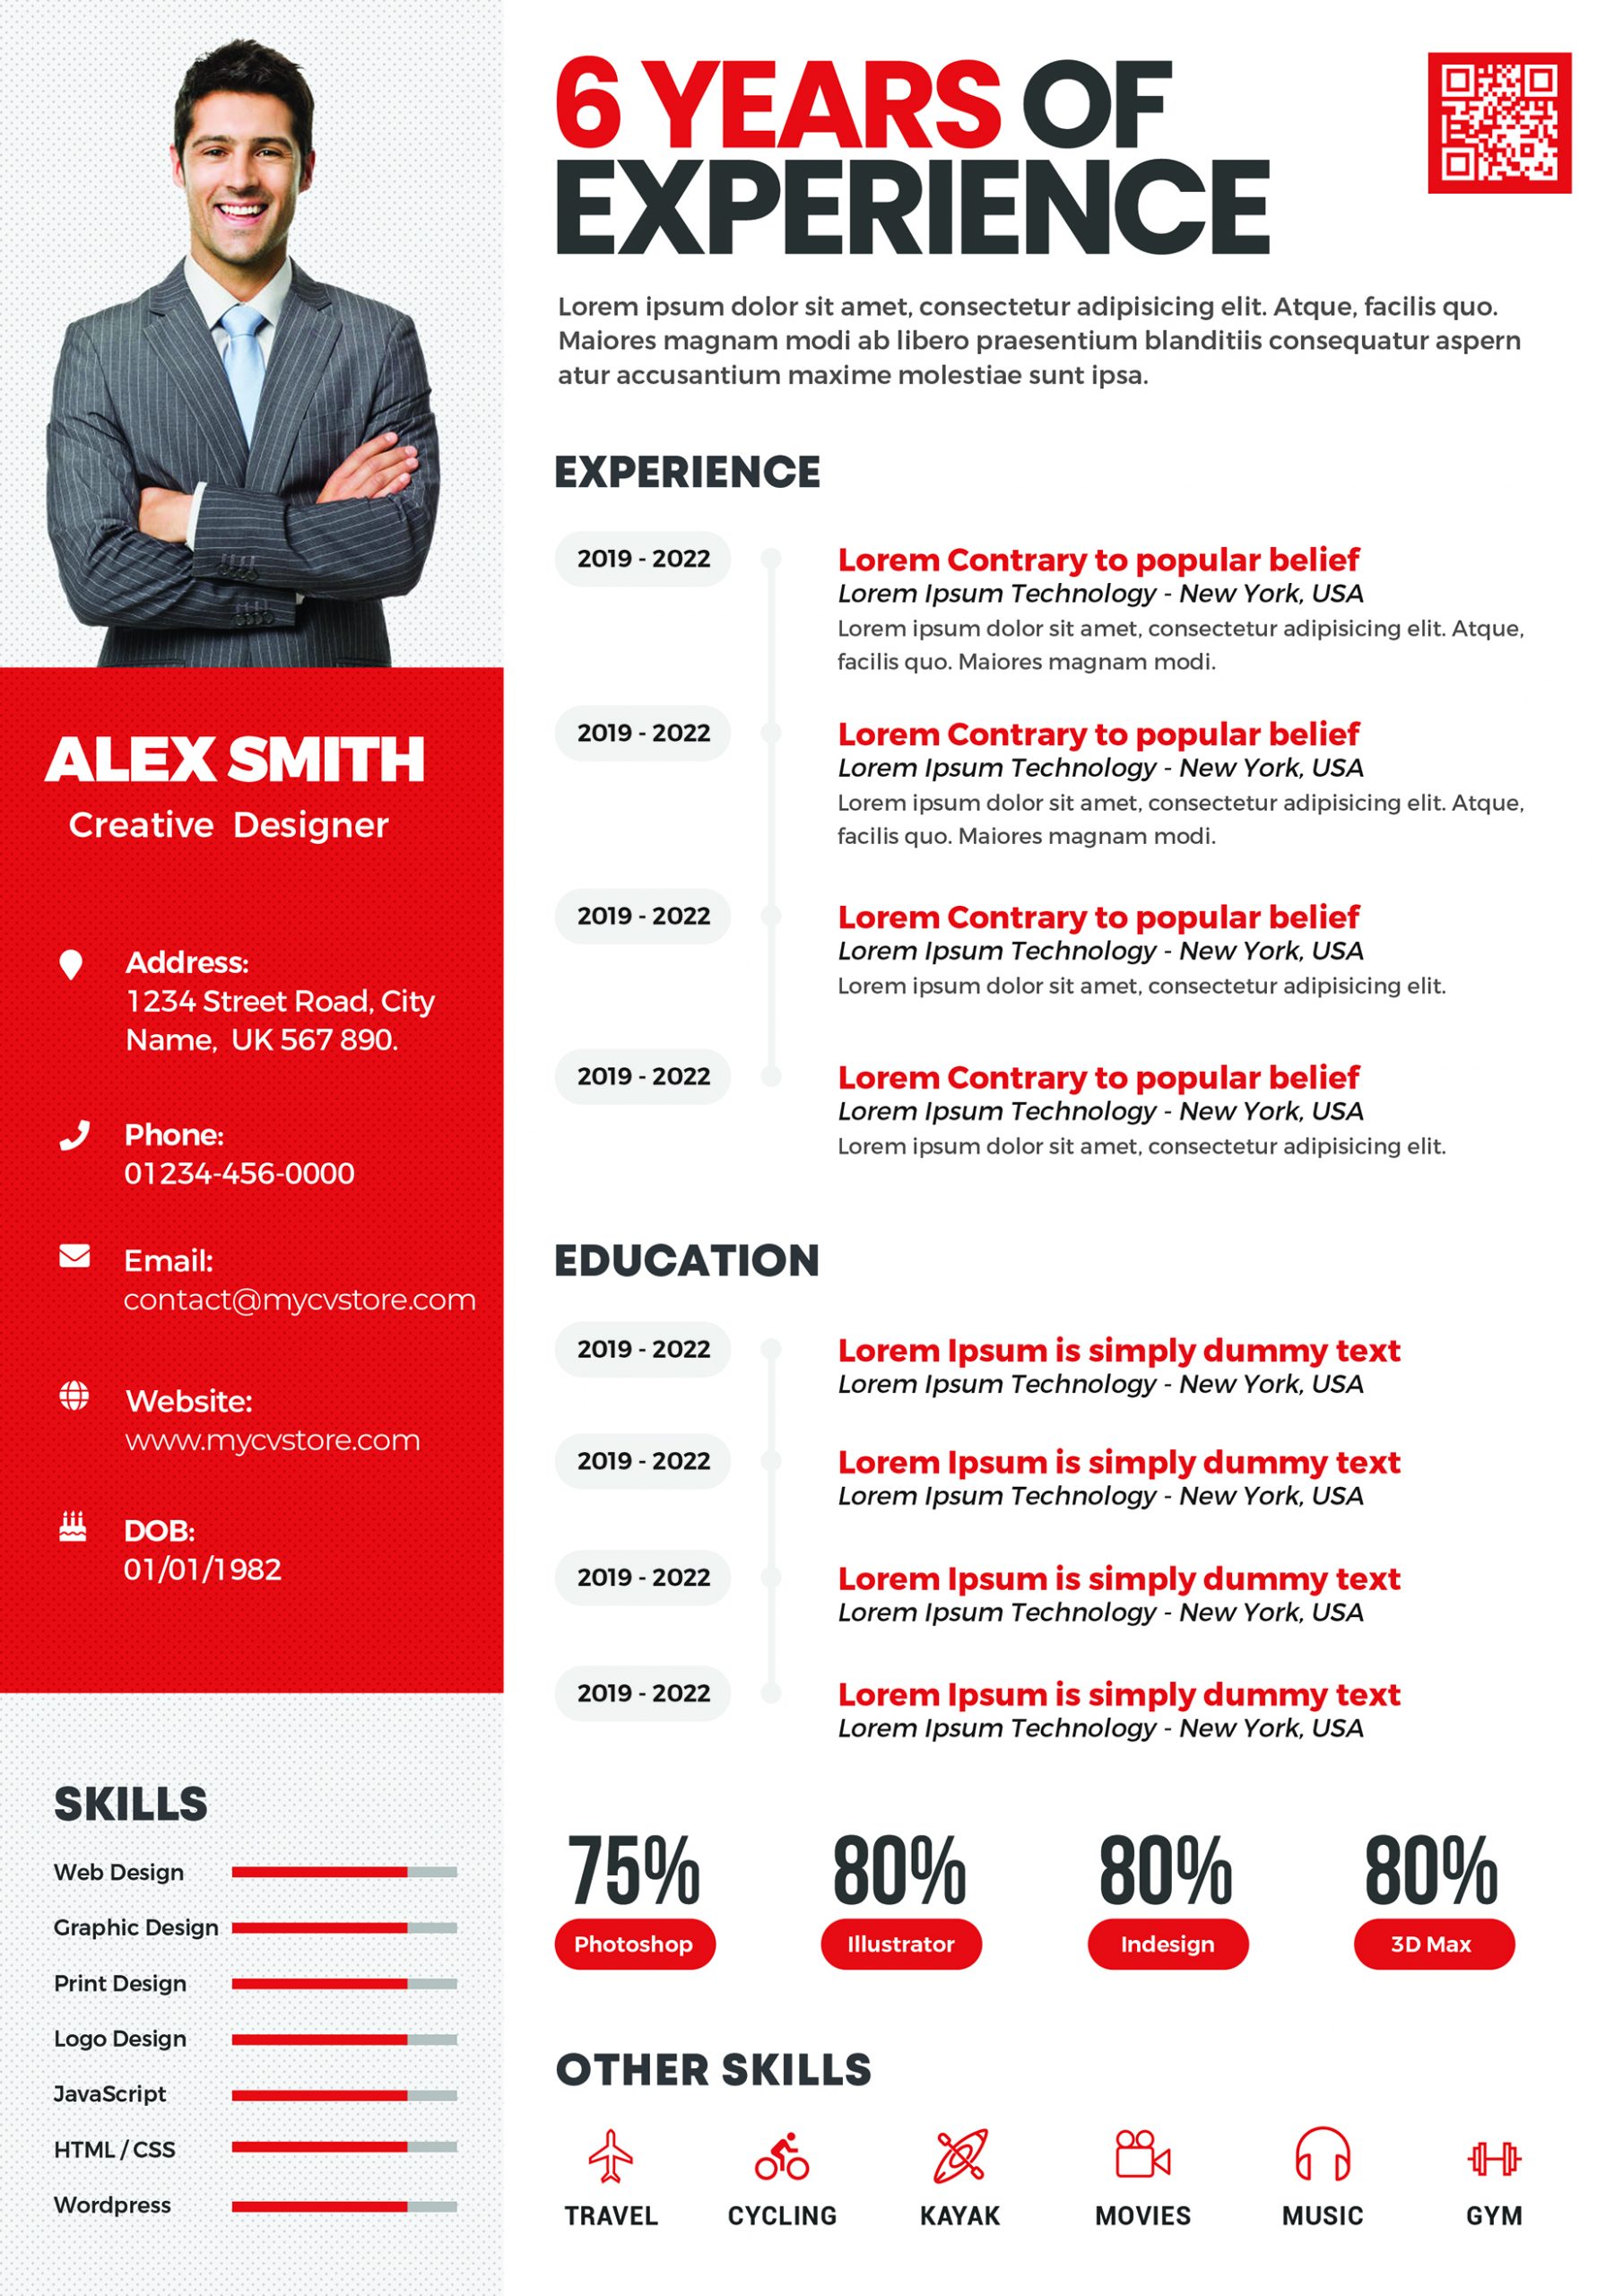 Professional Services Manager Resume Modern & Professional Cv/Resume